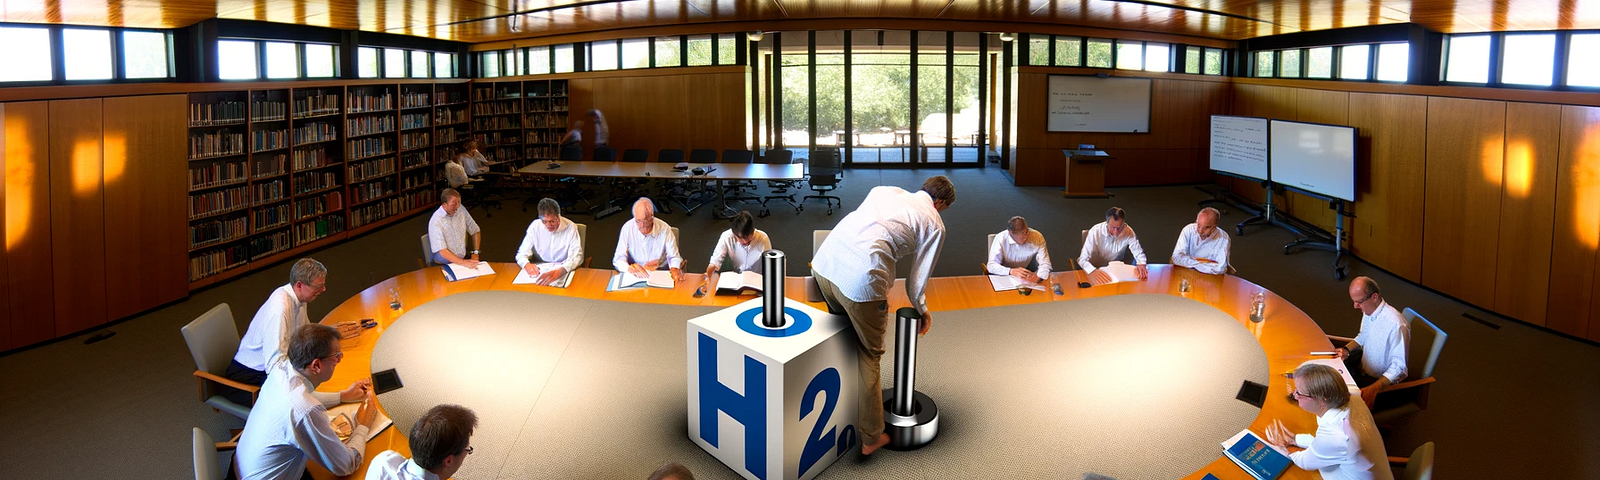 ChatGPT & Midjourney generated panoramic image of a think tank boardroom where shirt-sleeve-clad academics attempt to shove a square peg labeled “H2” into a round hole